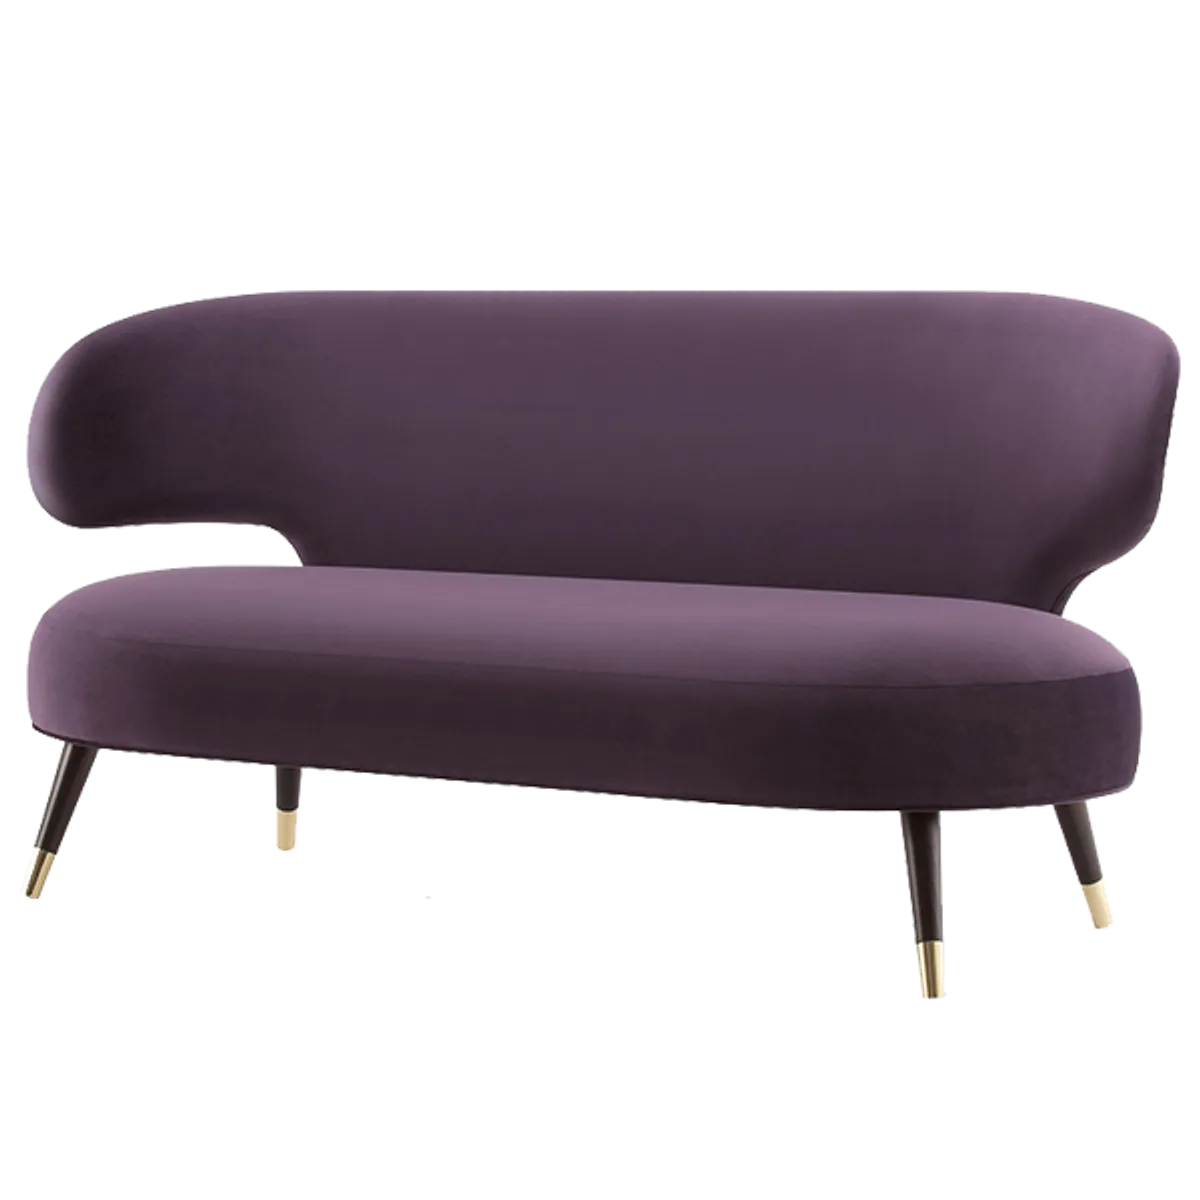 Web Sylvia Sofa Purple Upholstery And Wooden Legs Hotel Furniture By Insideoutcontracts